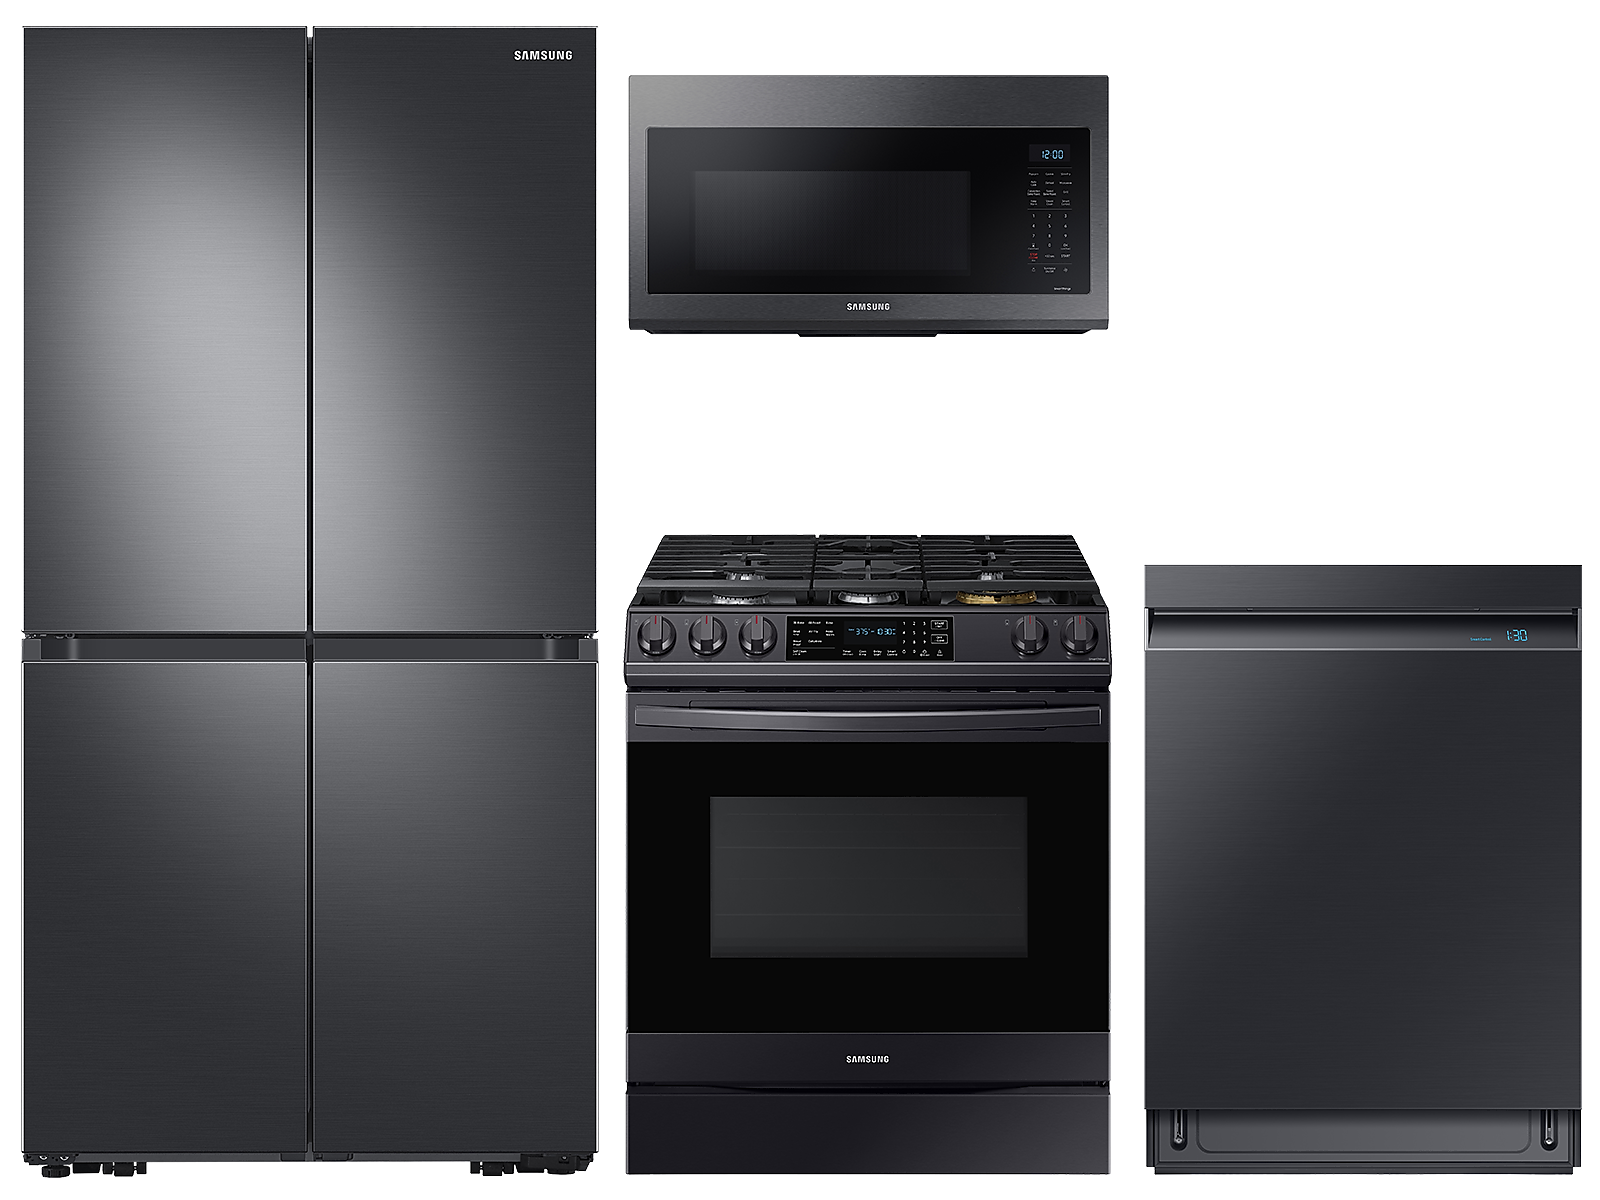 Samsung 29 cu. ft. 4-Door refrigerator, gas range, convection microwave and Smart Linear dishwasher package(BNDL-1646291342464) photo